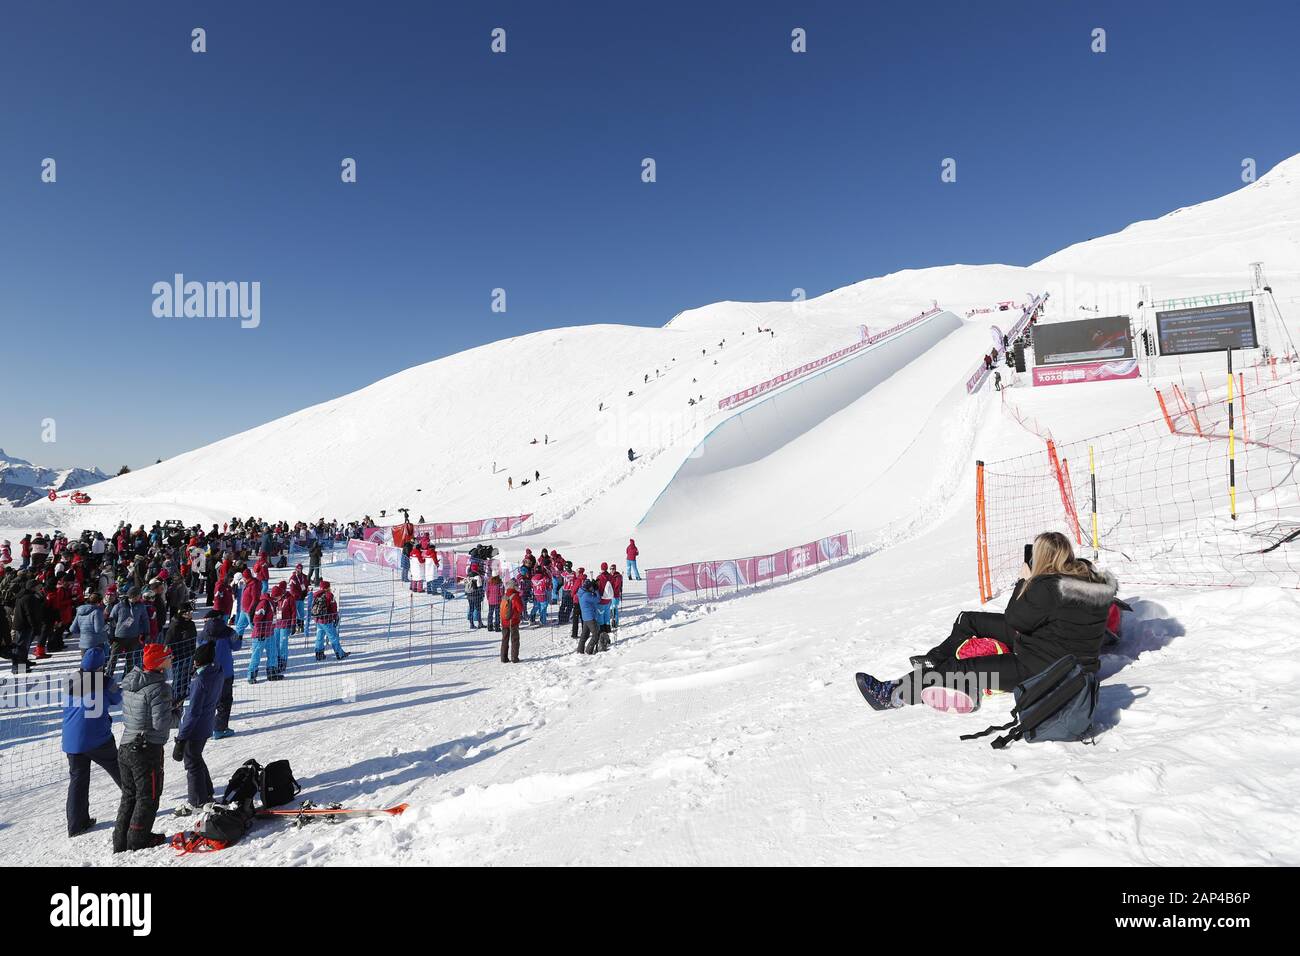 Leysin, Switzerland. 20th Jan, 2020. General view during the 3rd Winter Youth Olympic Games Lausanne 2020 Freestyle Skiing Women's Halfpipe at Leysin Park & Pipe in Leysin, Switzerland, January 20, 2020. Credit: AFLO SPORT/Alamy Live News Stock Photo